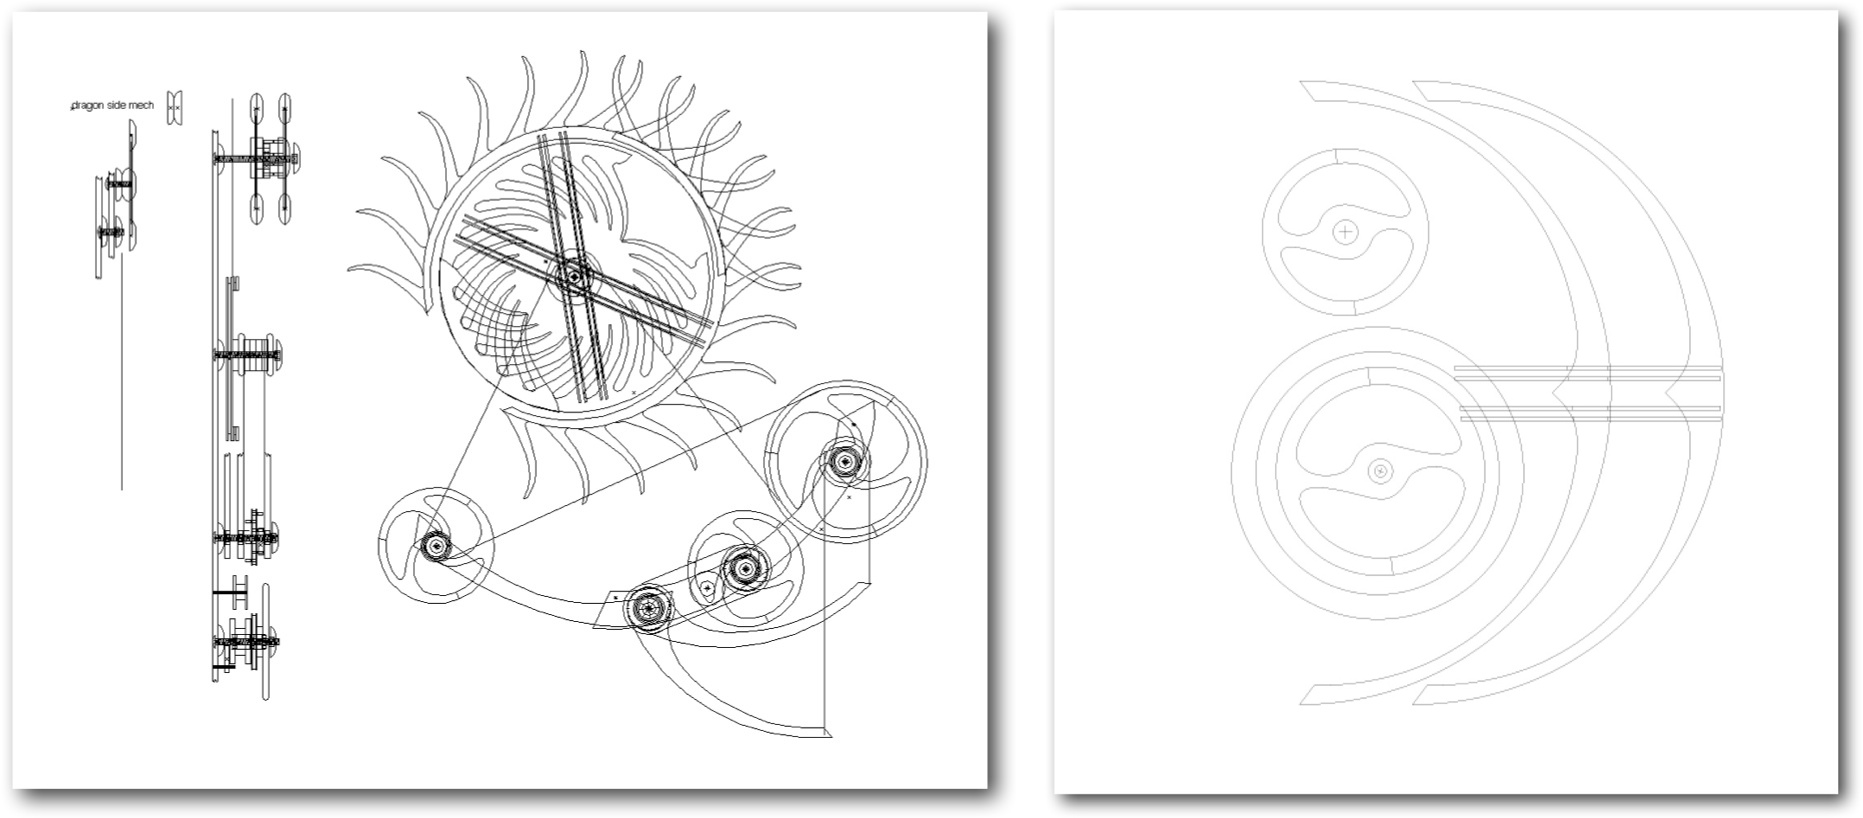 Design drawings completed by kinetic sculptor David C. Roy of Wood That Works